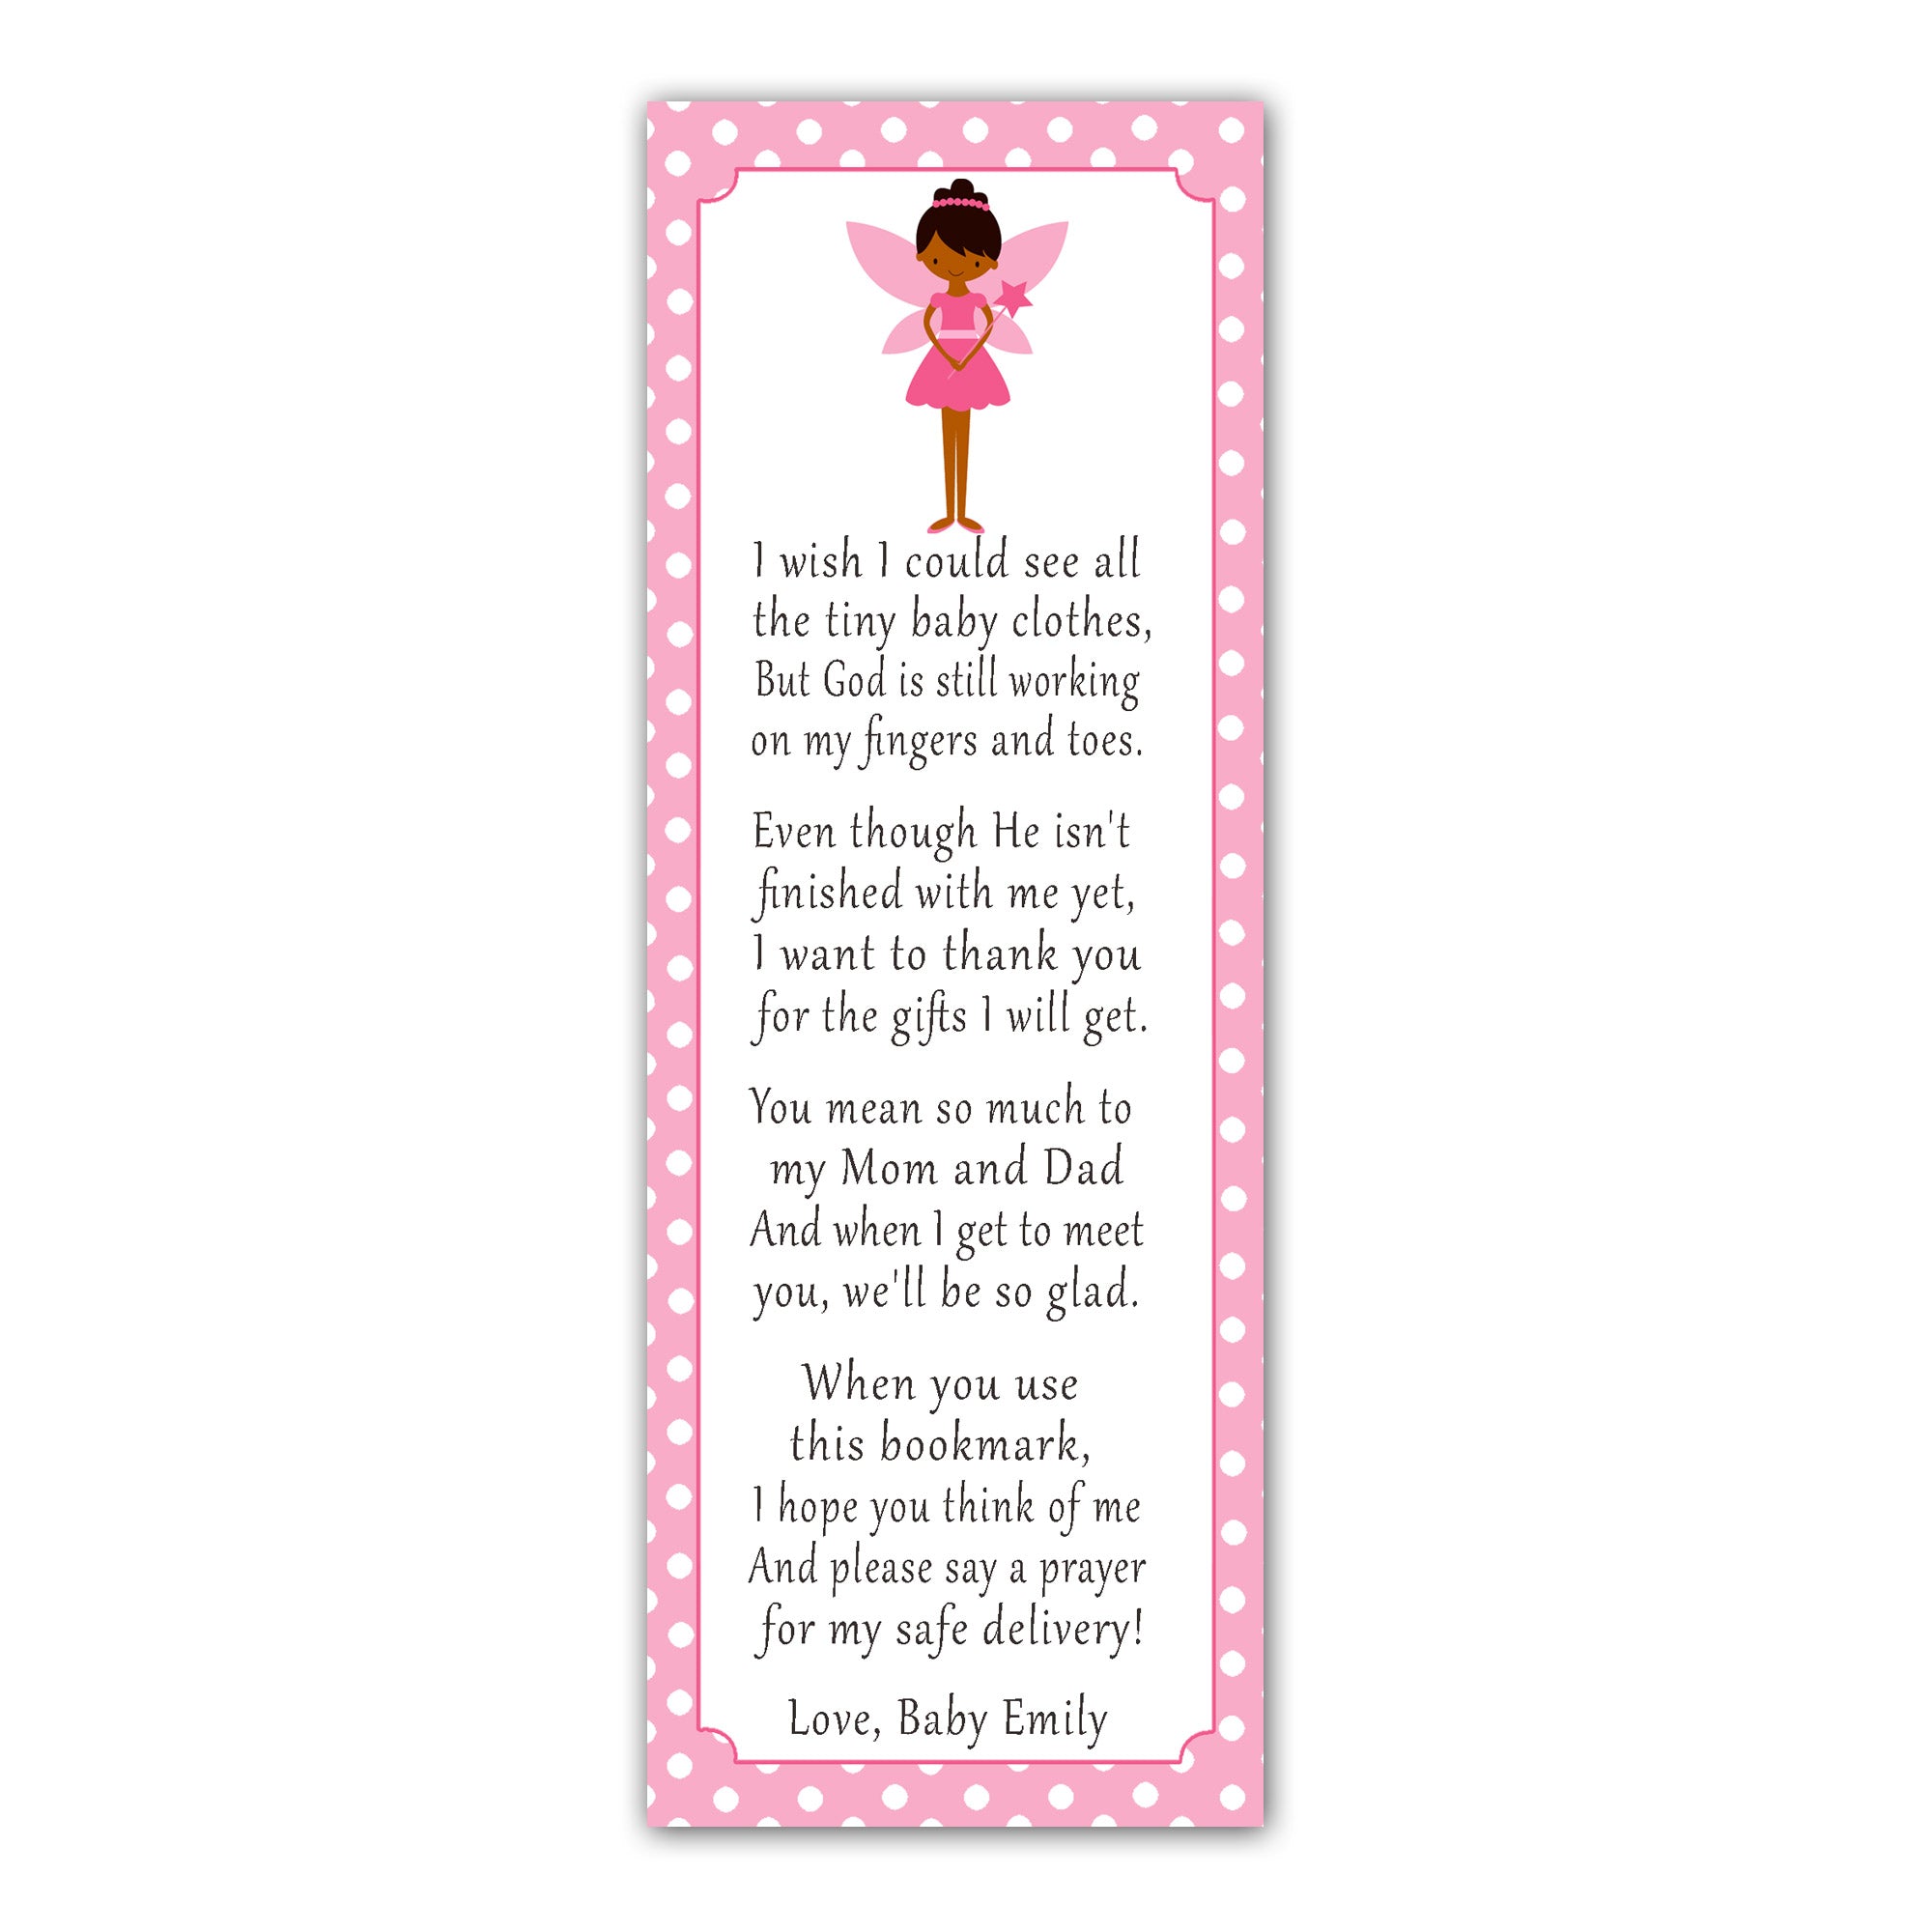 50 bookmarks fairy baby shower favors pink white pixie personalized